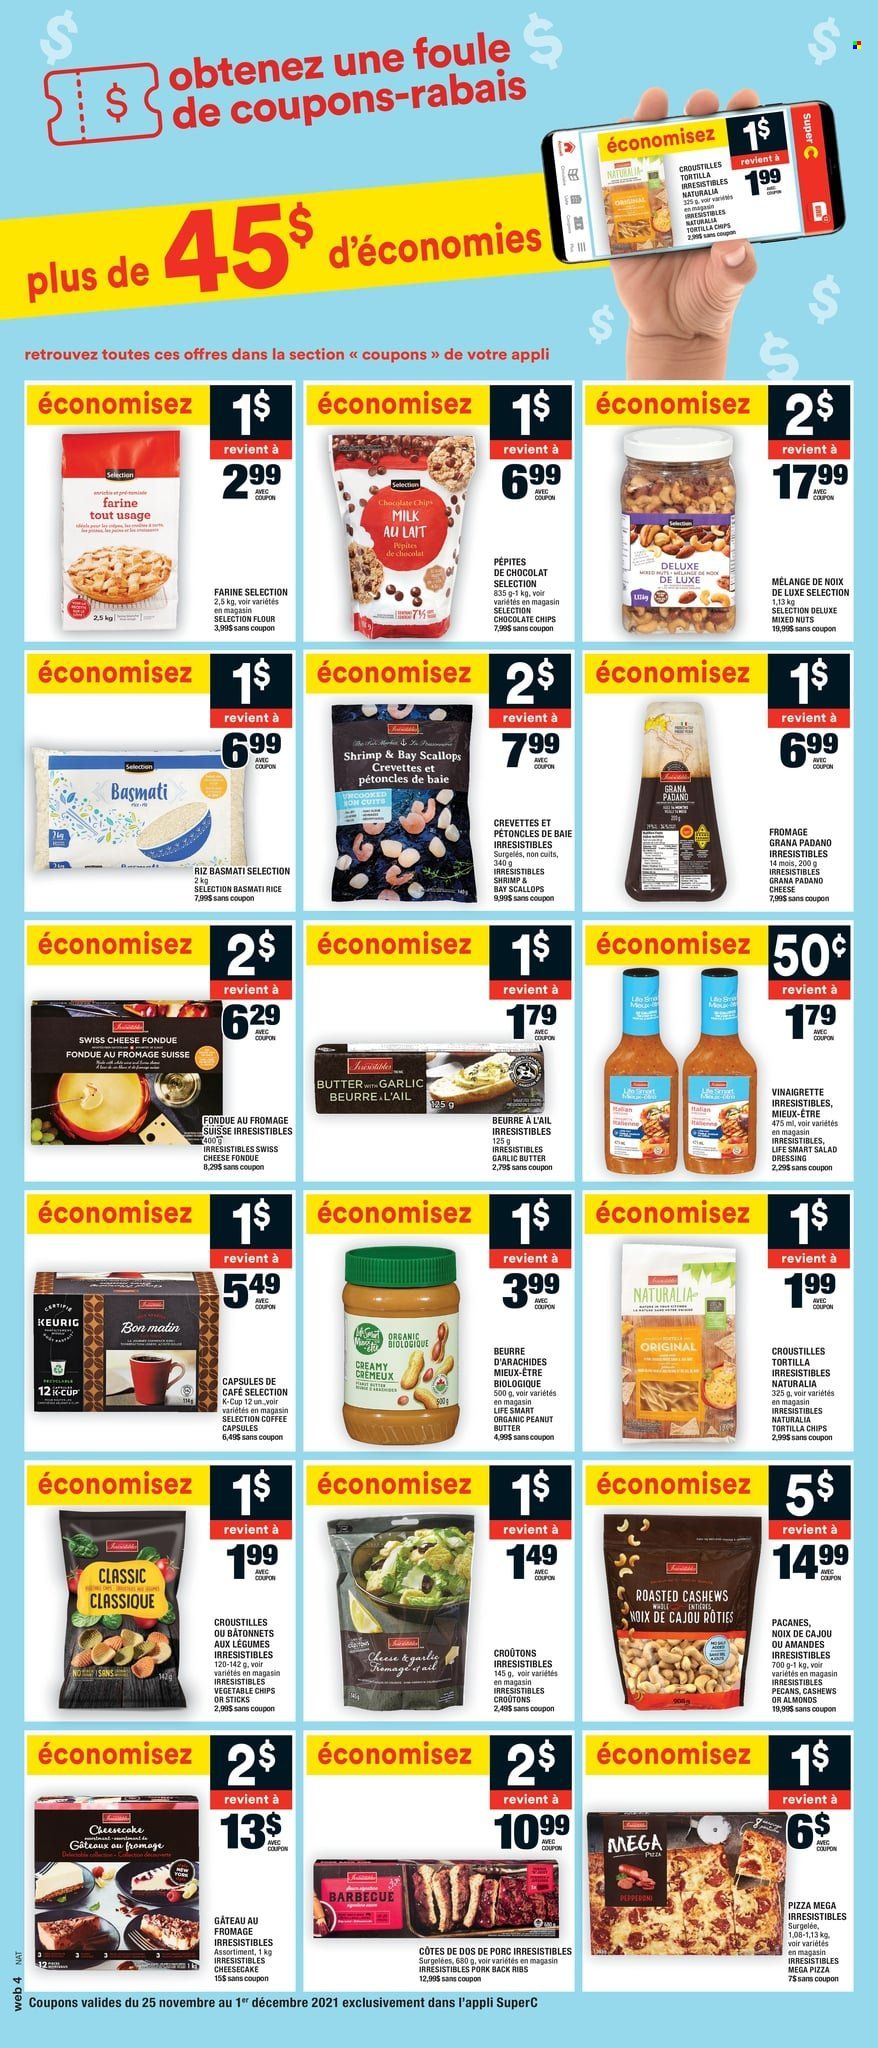 thumbnail - Super C Flyer - November 25, 2021 - December 01, 2021 - Sales products - cheesecake, scallops, shrimps, pizza, swiss cheese, Grana Padano, milk, tortilla chips, vegetable chips, croutons, basmati rice, rice, salad dressing, vinaigrette dressing, dressing, peanut butter, almonds, cashews, pecans, mixed nuts, coffee, coffee capsules, K-Cups, Keurig, pork meat, pork ribs, pork back ribs. Page 11.